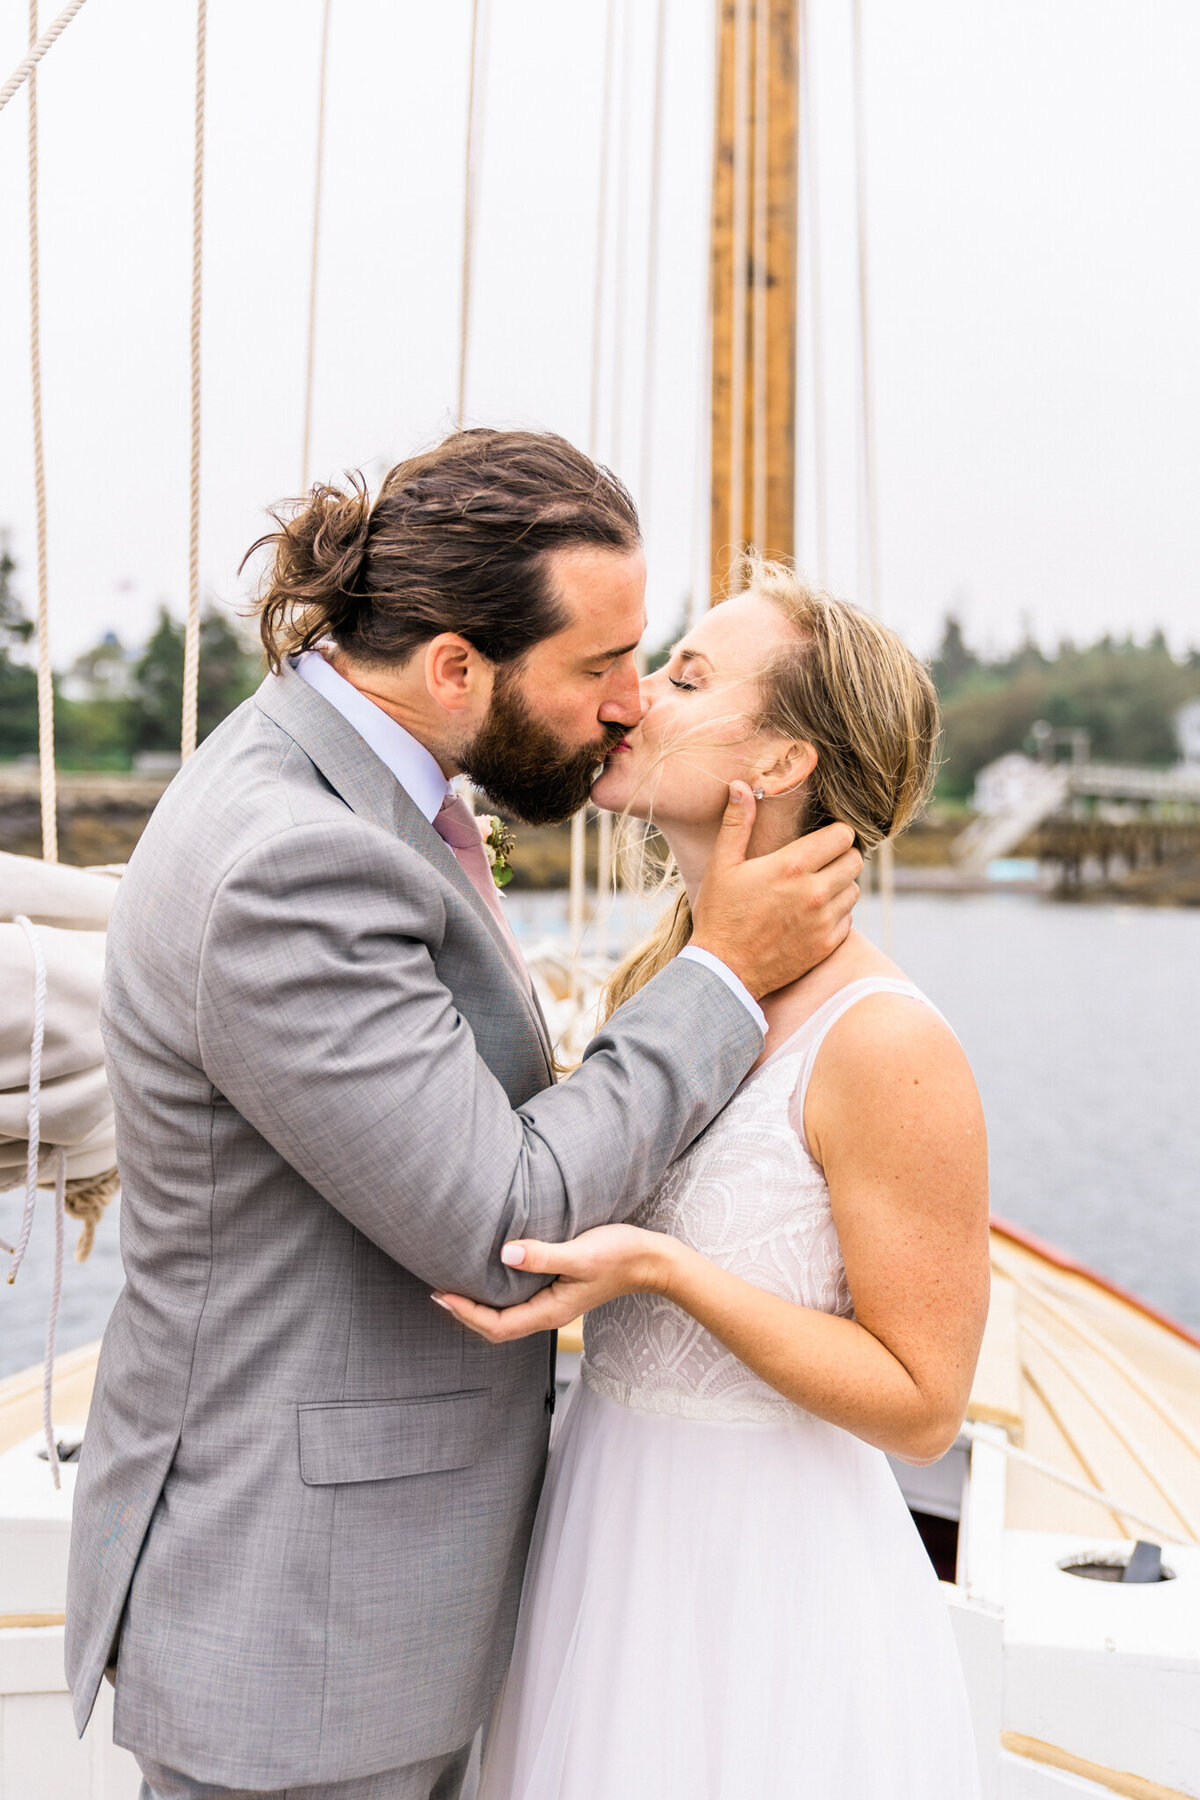 Maine Wedding Photographer | Adventure and Vows (28 of 43)